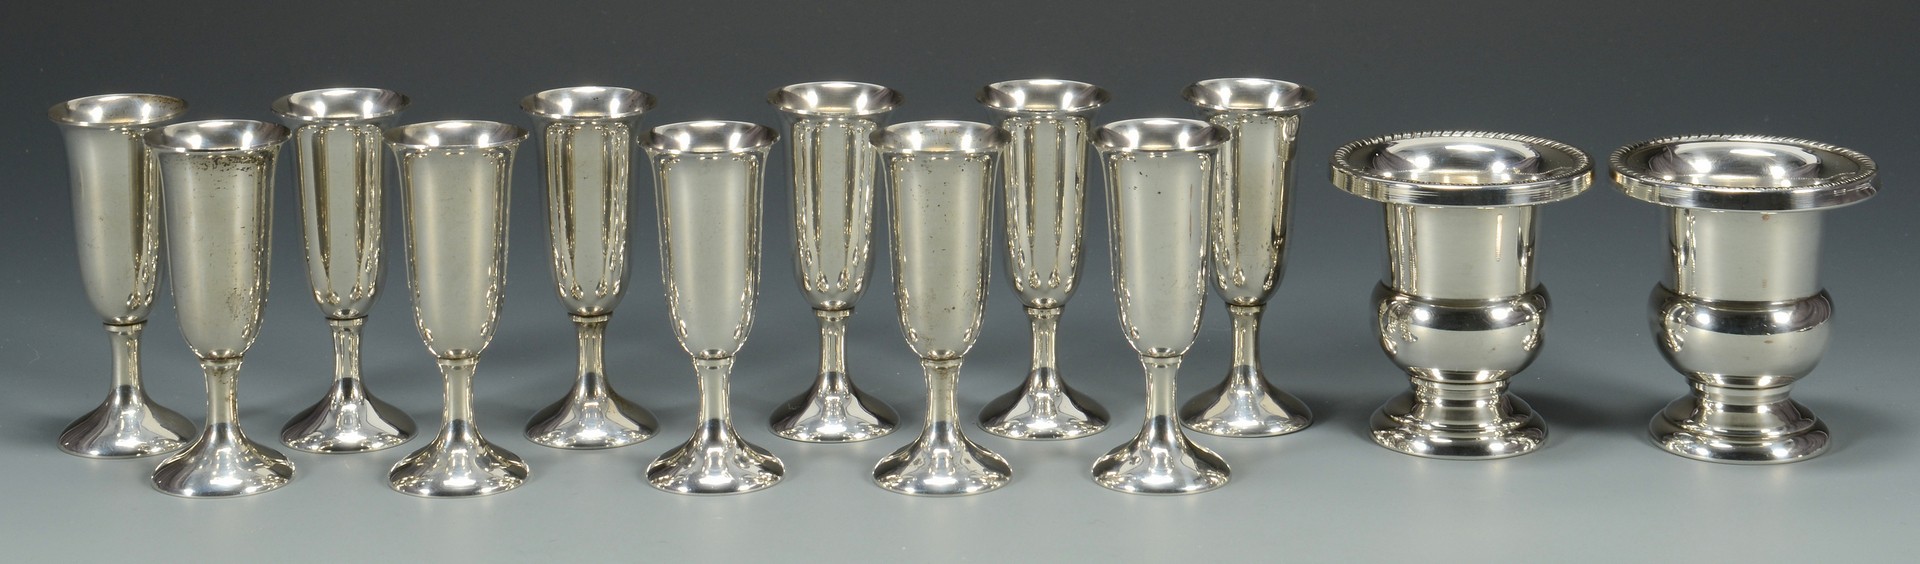 Lot 684: Grouping of Sterling Silver, 31 pcs.